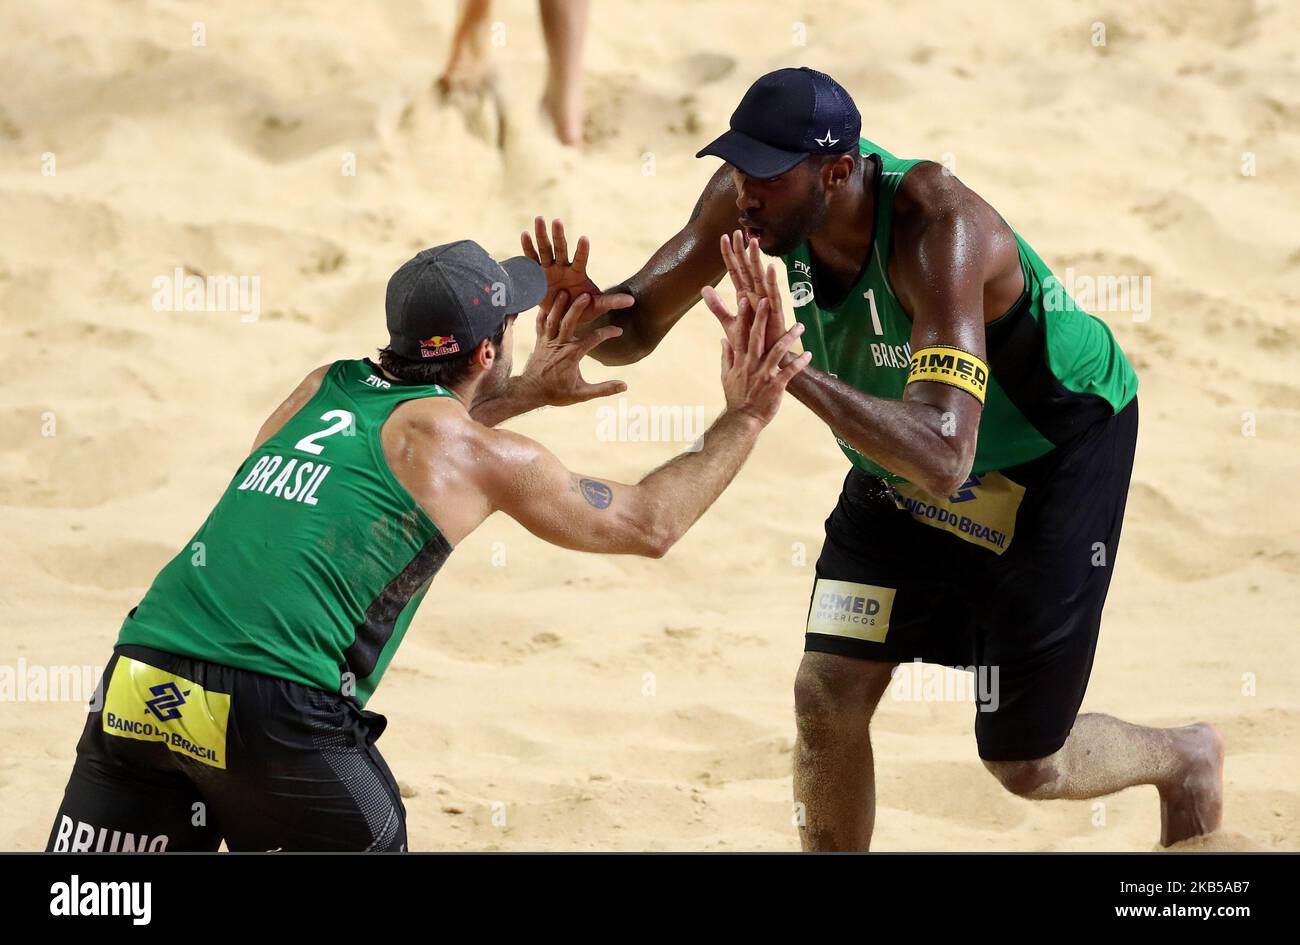 Evandro Goncalves and Bruno Oscar Schmidt (BRA) celebrate during the Beach Volley Rome World Tour Finals Main Draw Pool G match at the Foro Italico in Rome, Italy on September 5, 2019 (Photo by Matteo Ciambelli/NurPhoto) Stock Photo